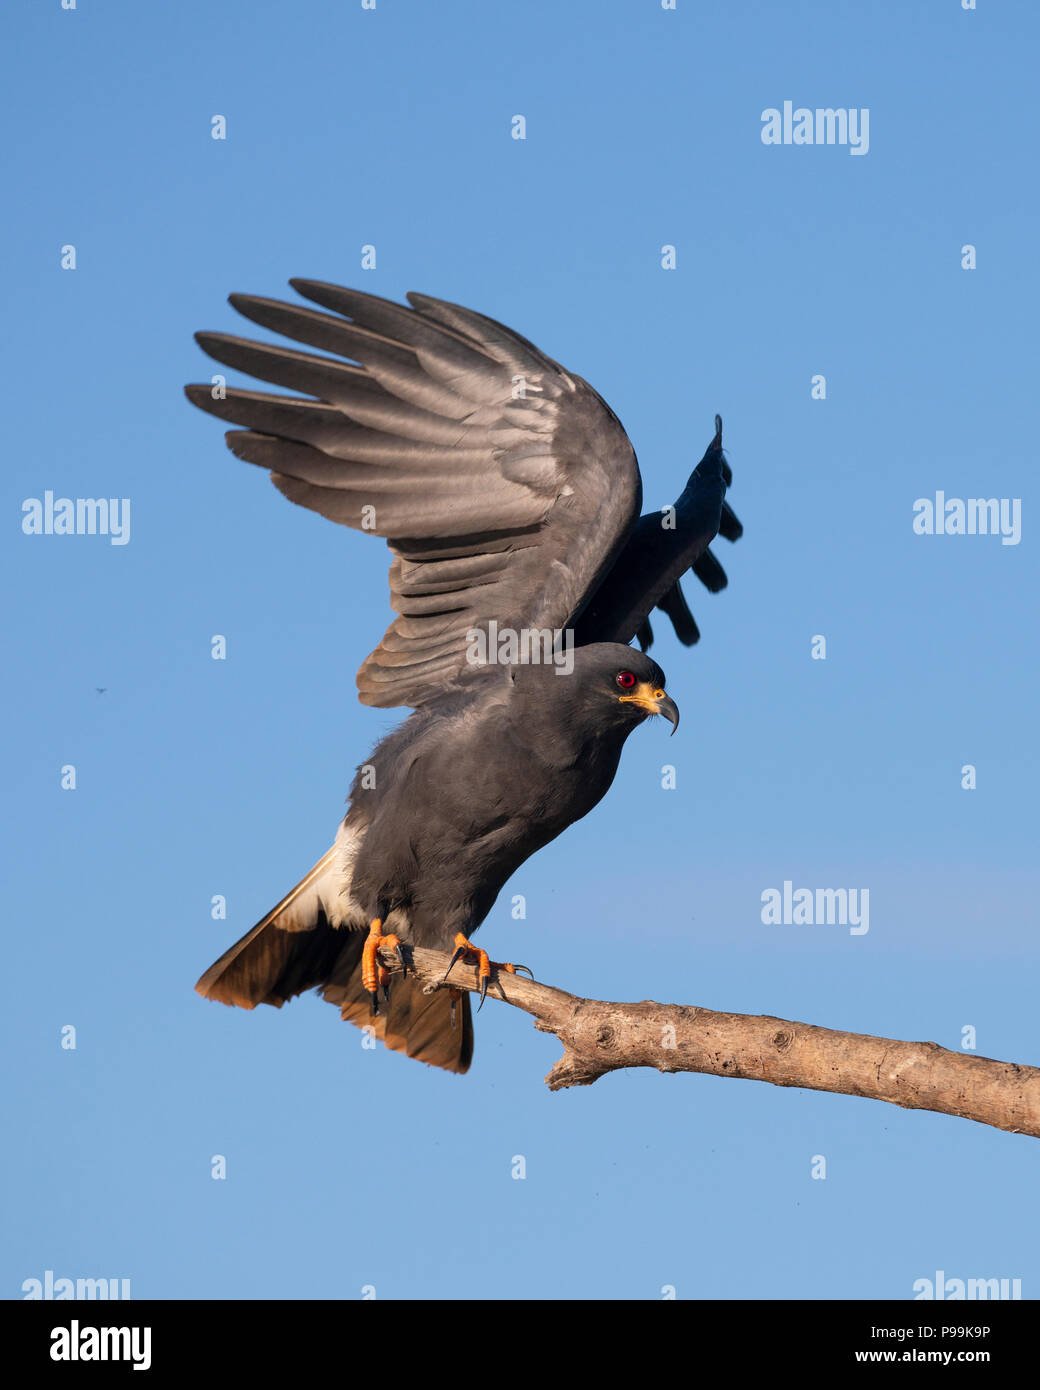 An adult Snail Kite from the Pantanal of Brazil Stock Photo